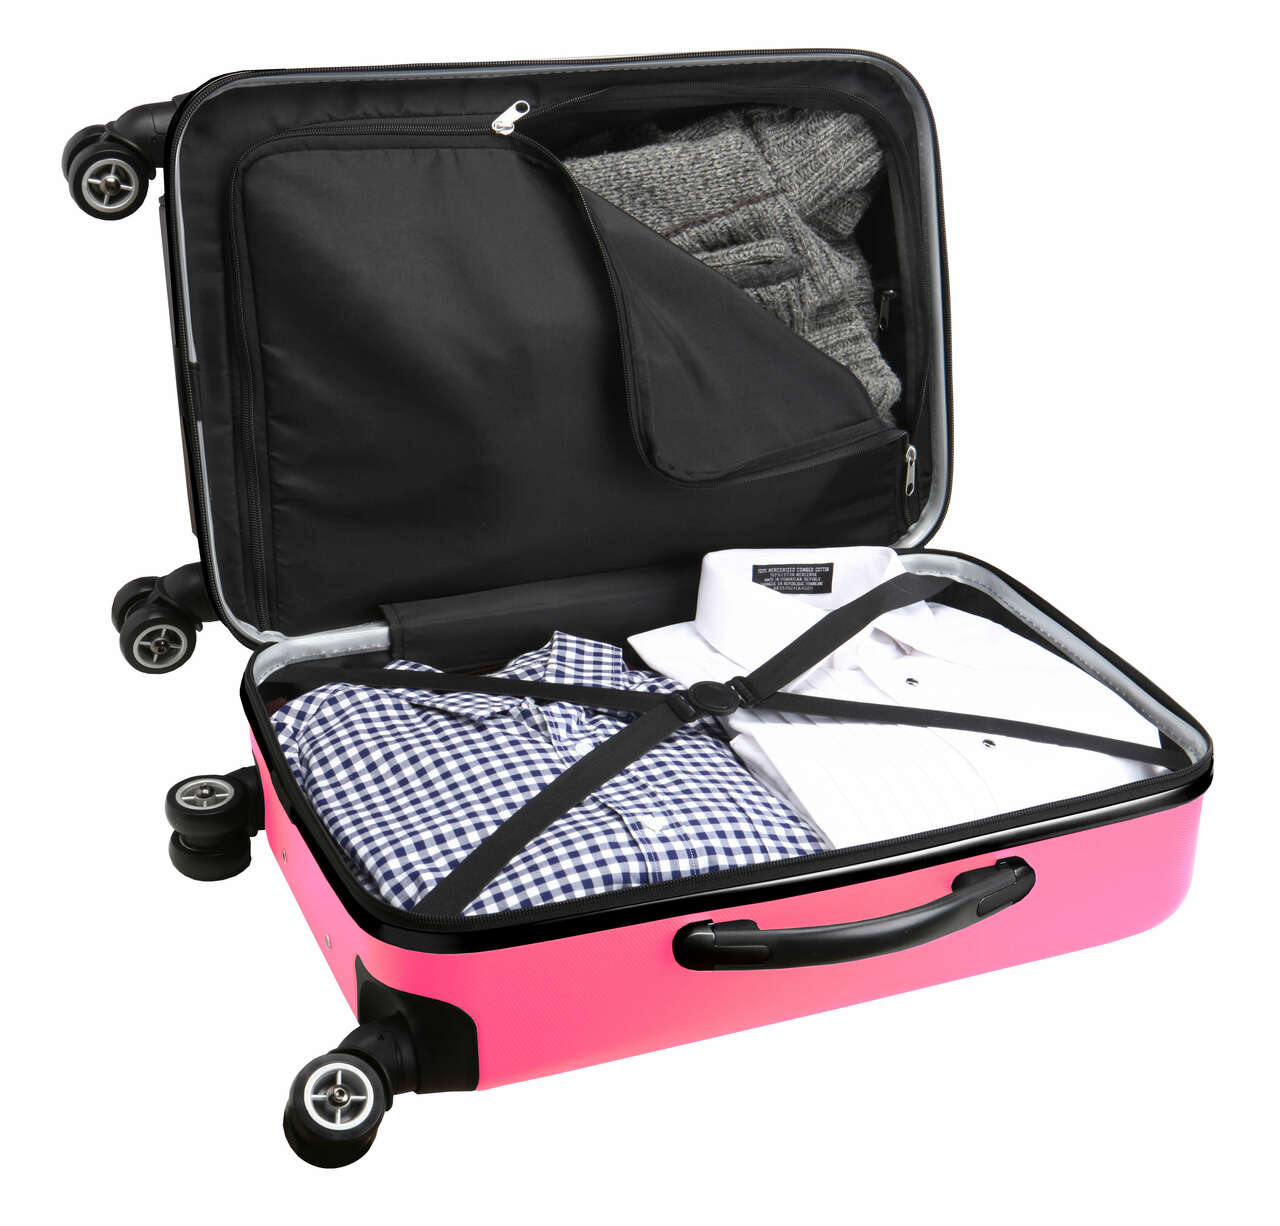 California Bears 20" Pink Domestic Carry-on Spinner